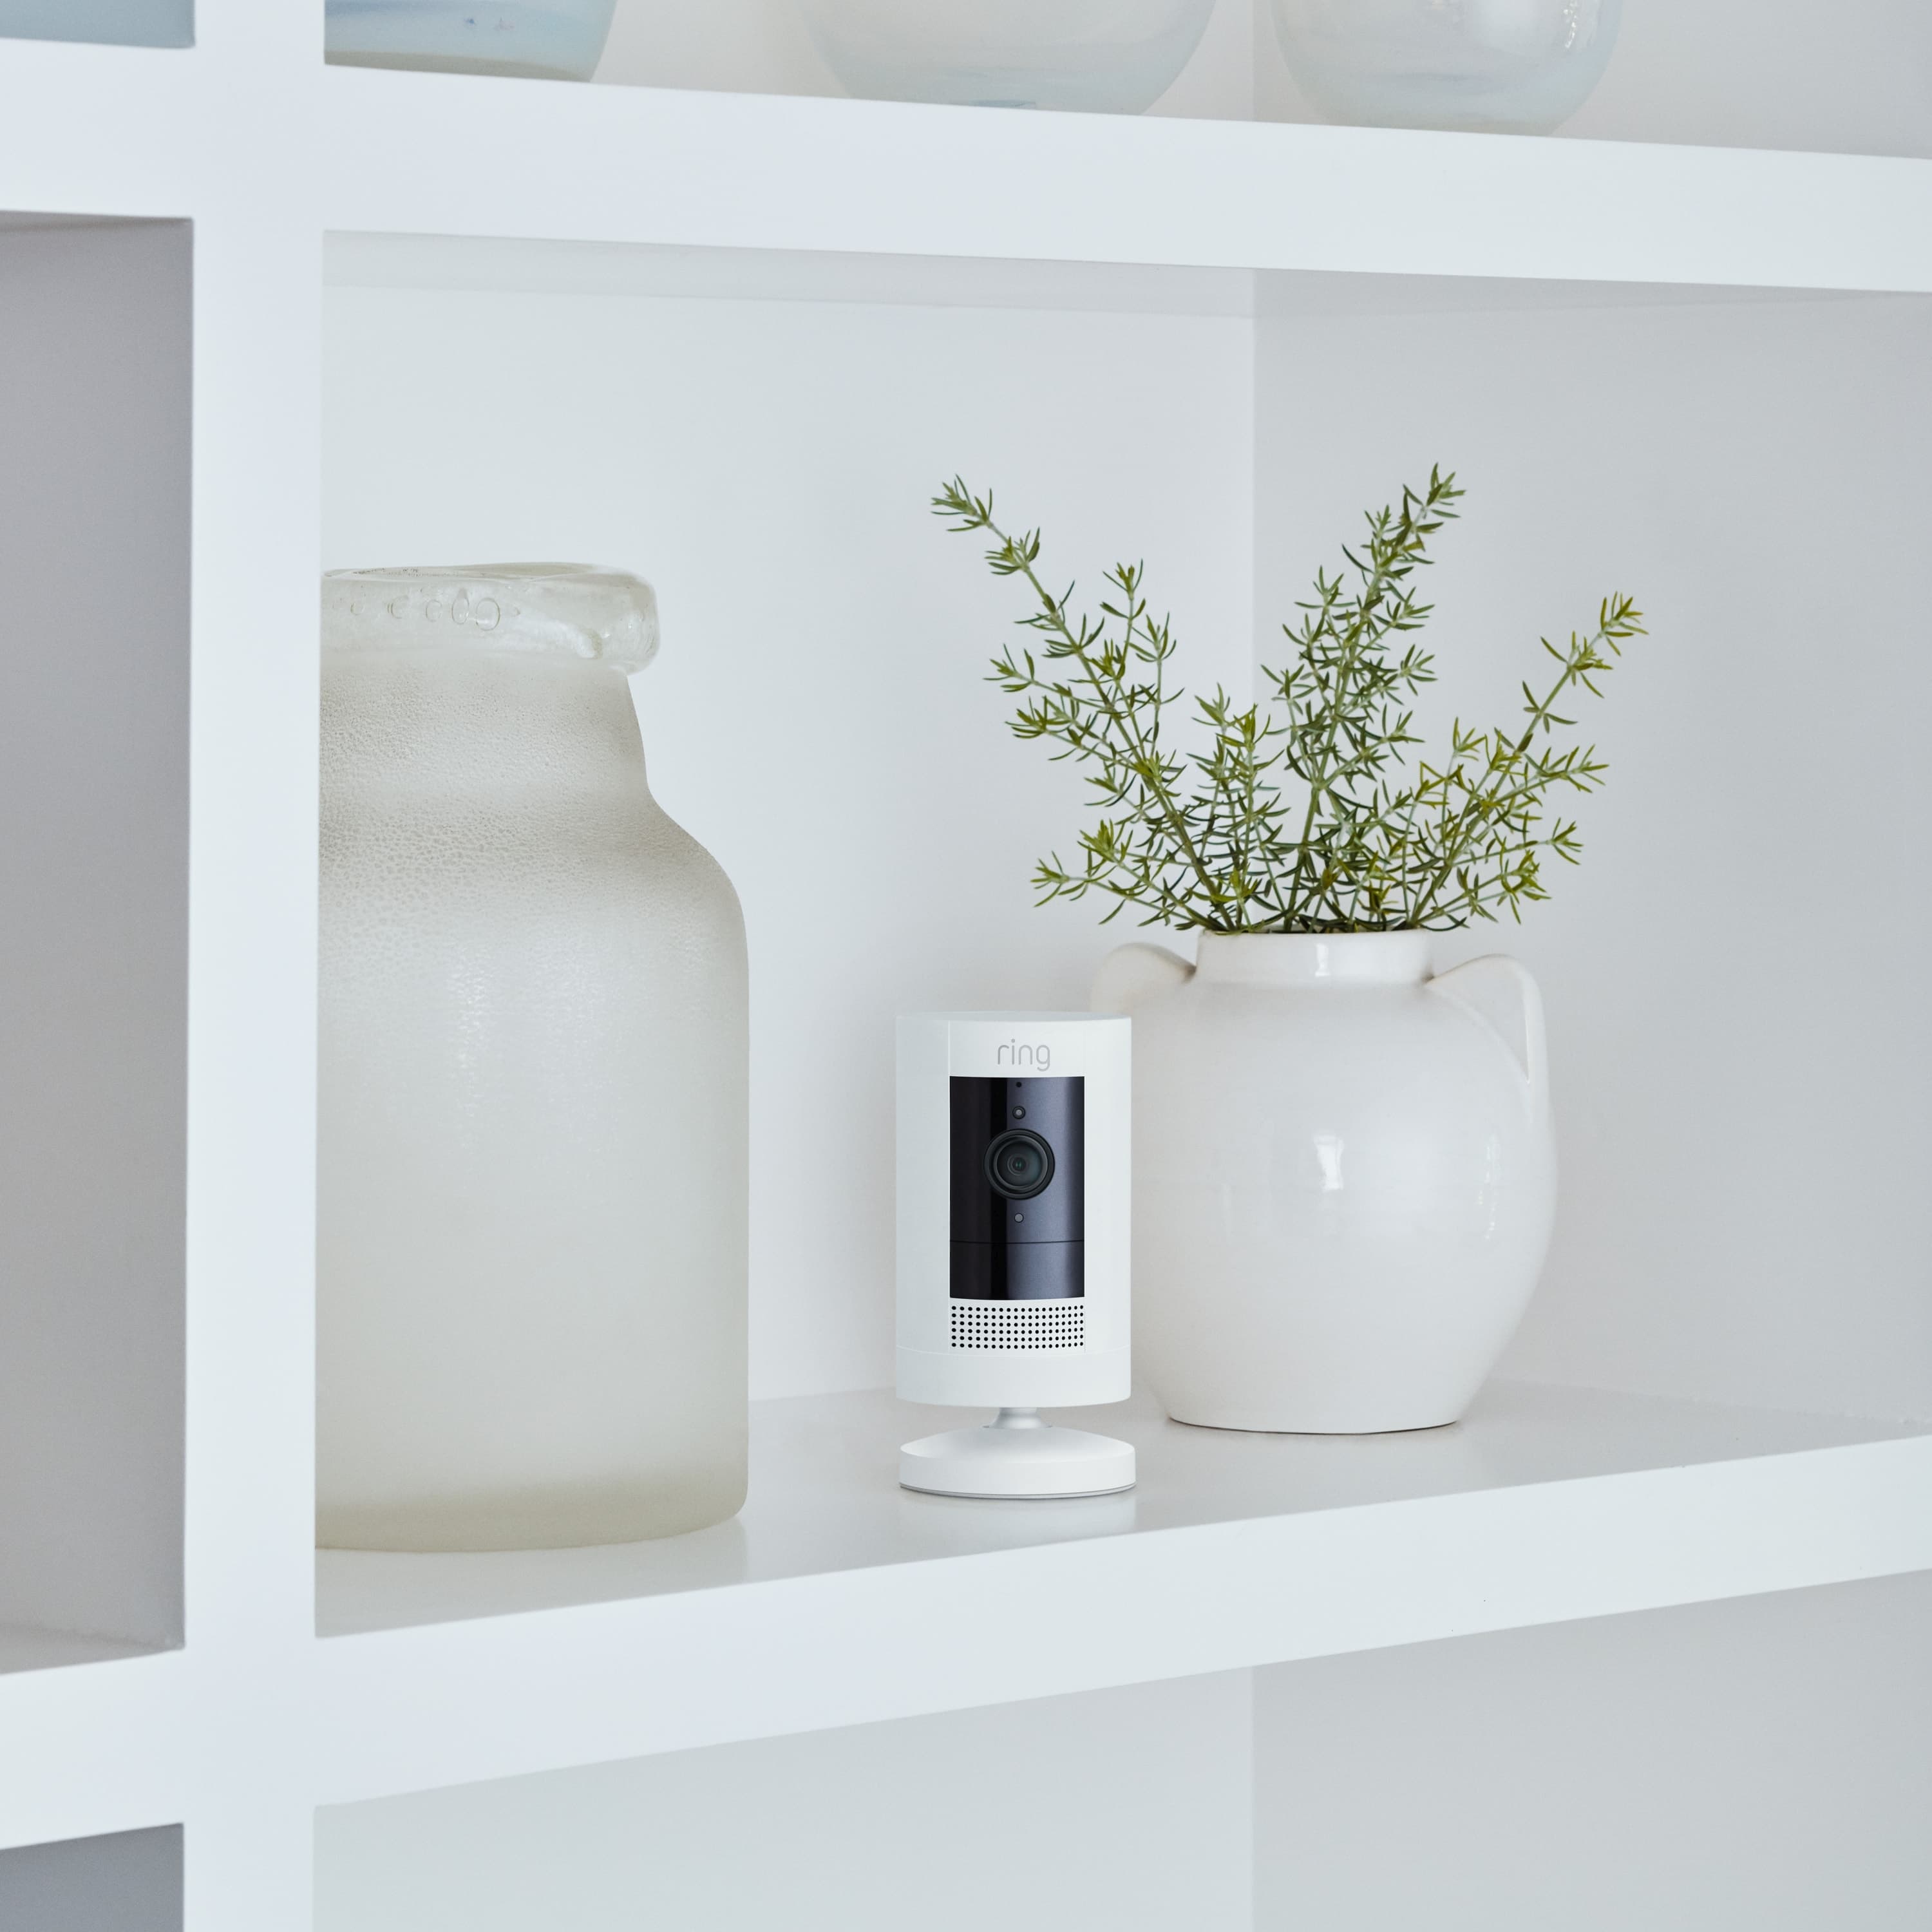 2-Pack Stick Up Cam Battery - Inside a home, Stick Up Cam, Battery model in white, is situated on a shelf between 2 vases.